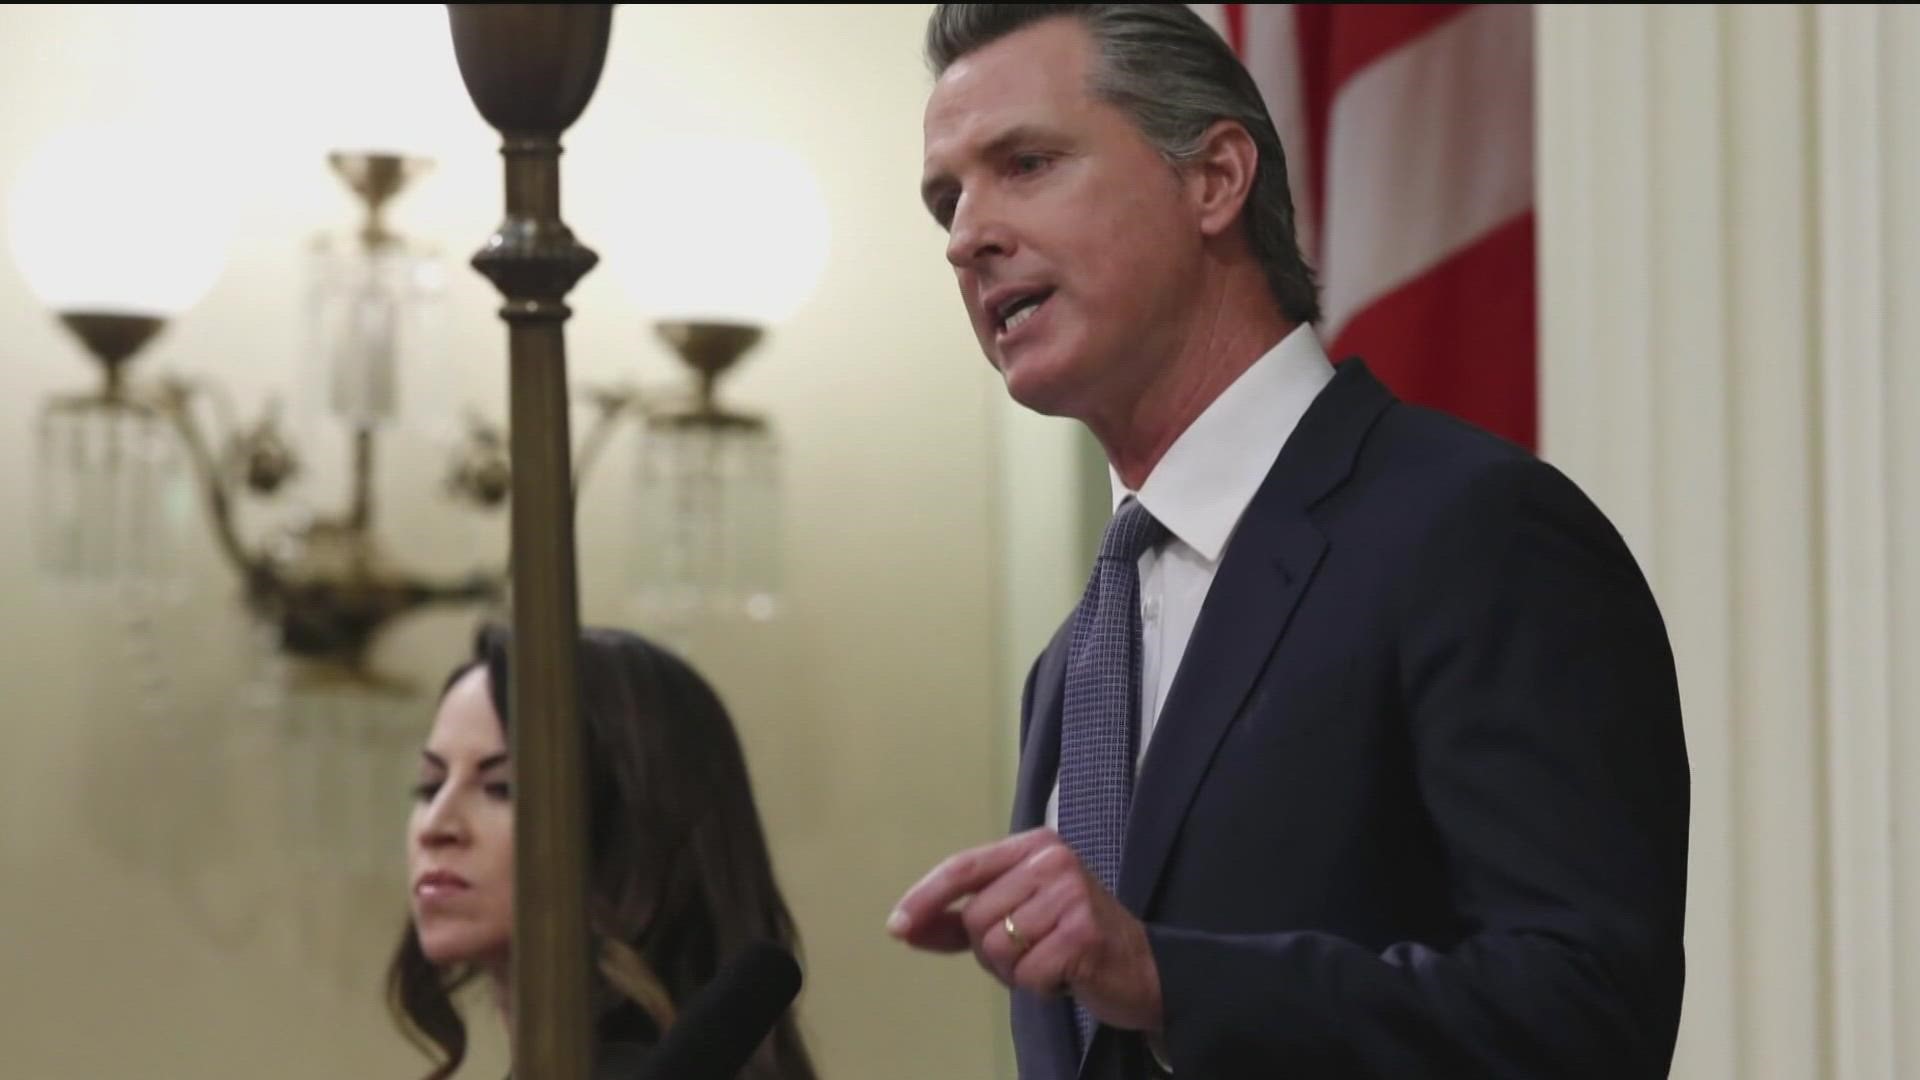 The San Diego County Registrar of Voters says there are two questions and even if you vote not to recall Newsom you can still vote for a candidate if he is recalled.